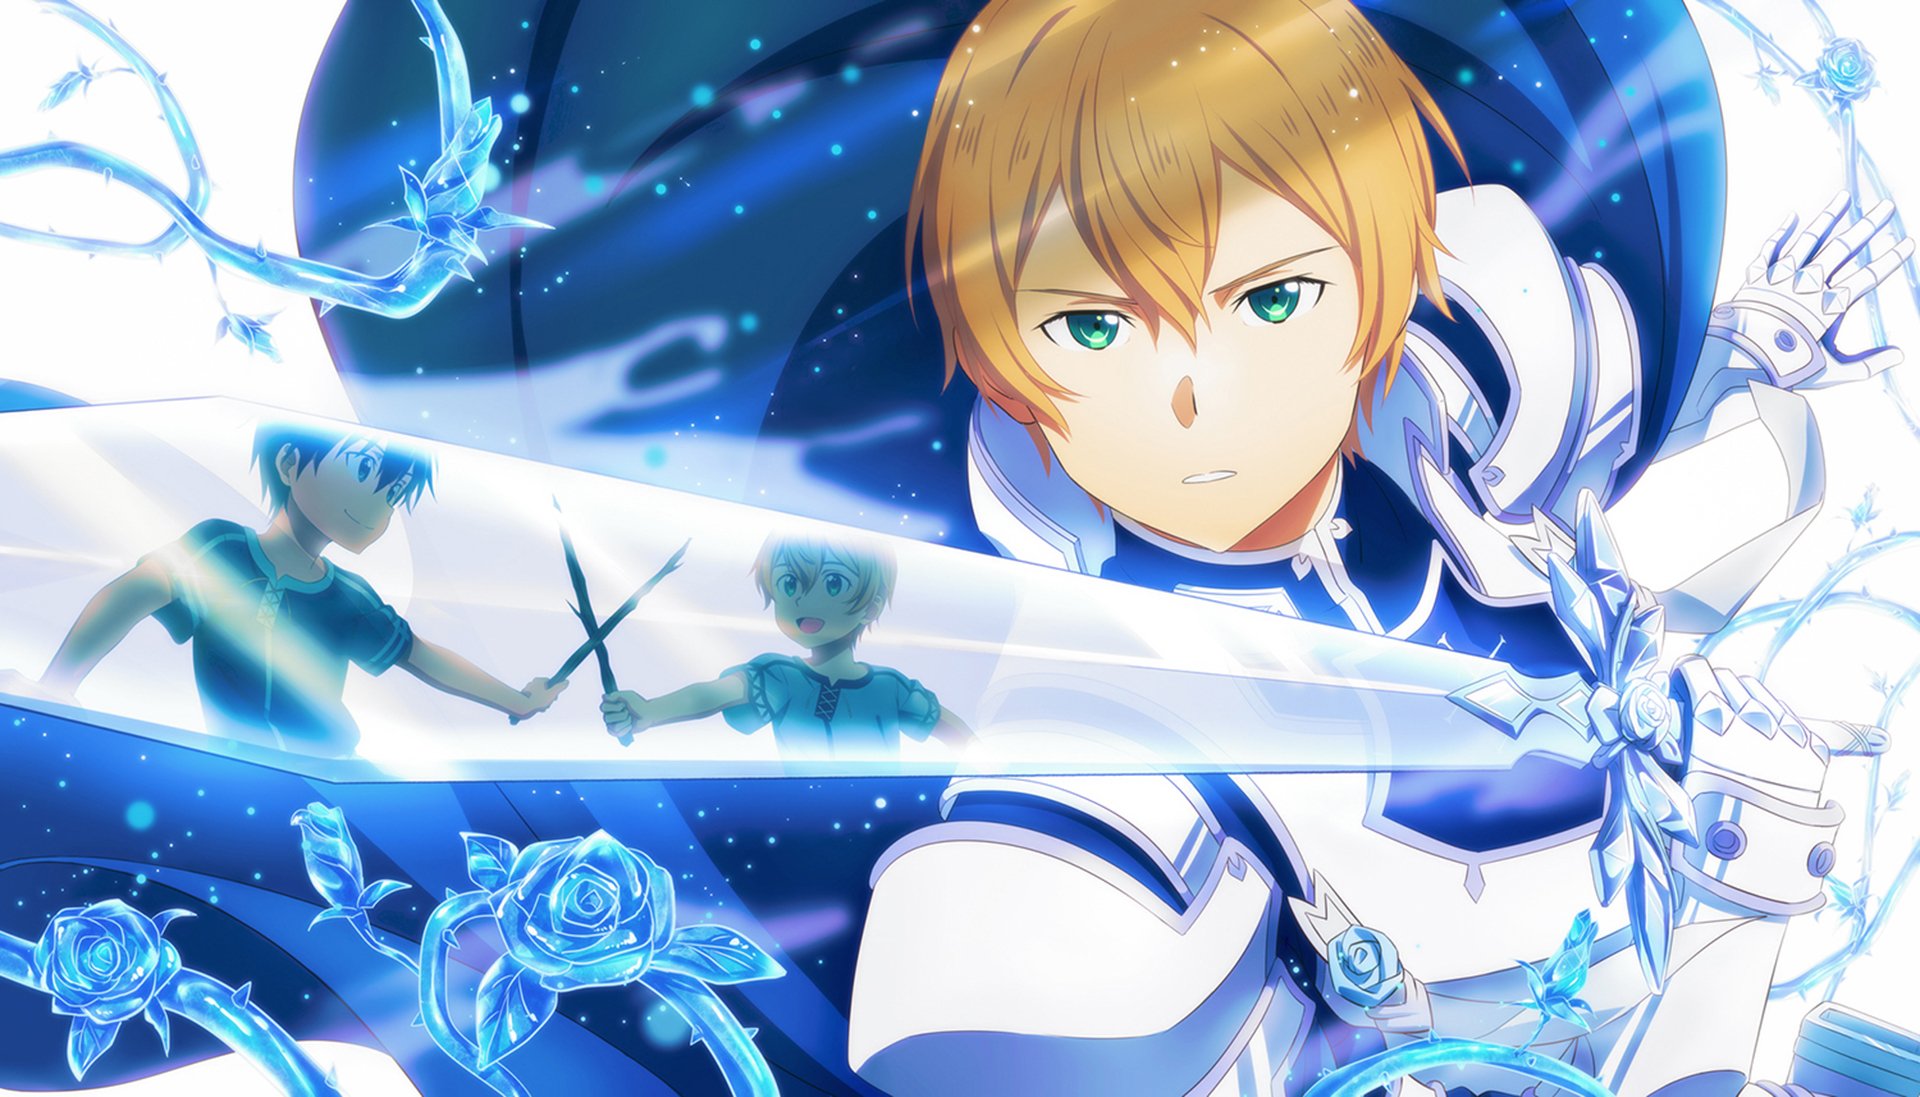 A vibrant scene featuring the Blue Rose Sword from Sword Art Online, with Kirito and Eugeo, set against a captivating HD desktop wallpaper background.